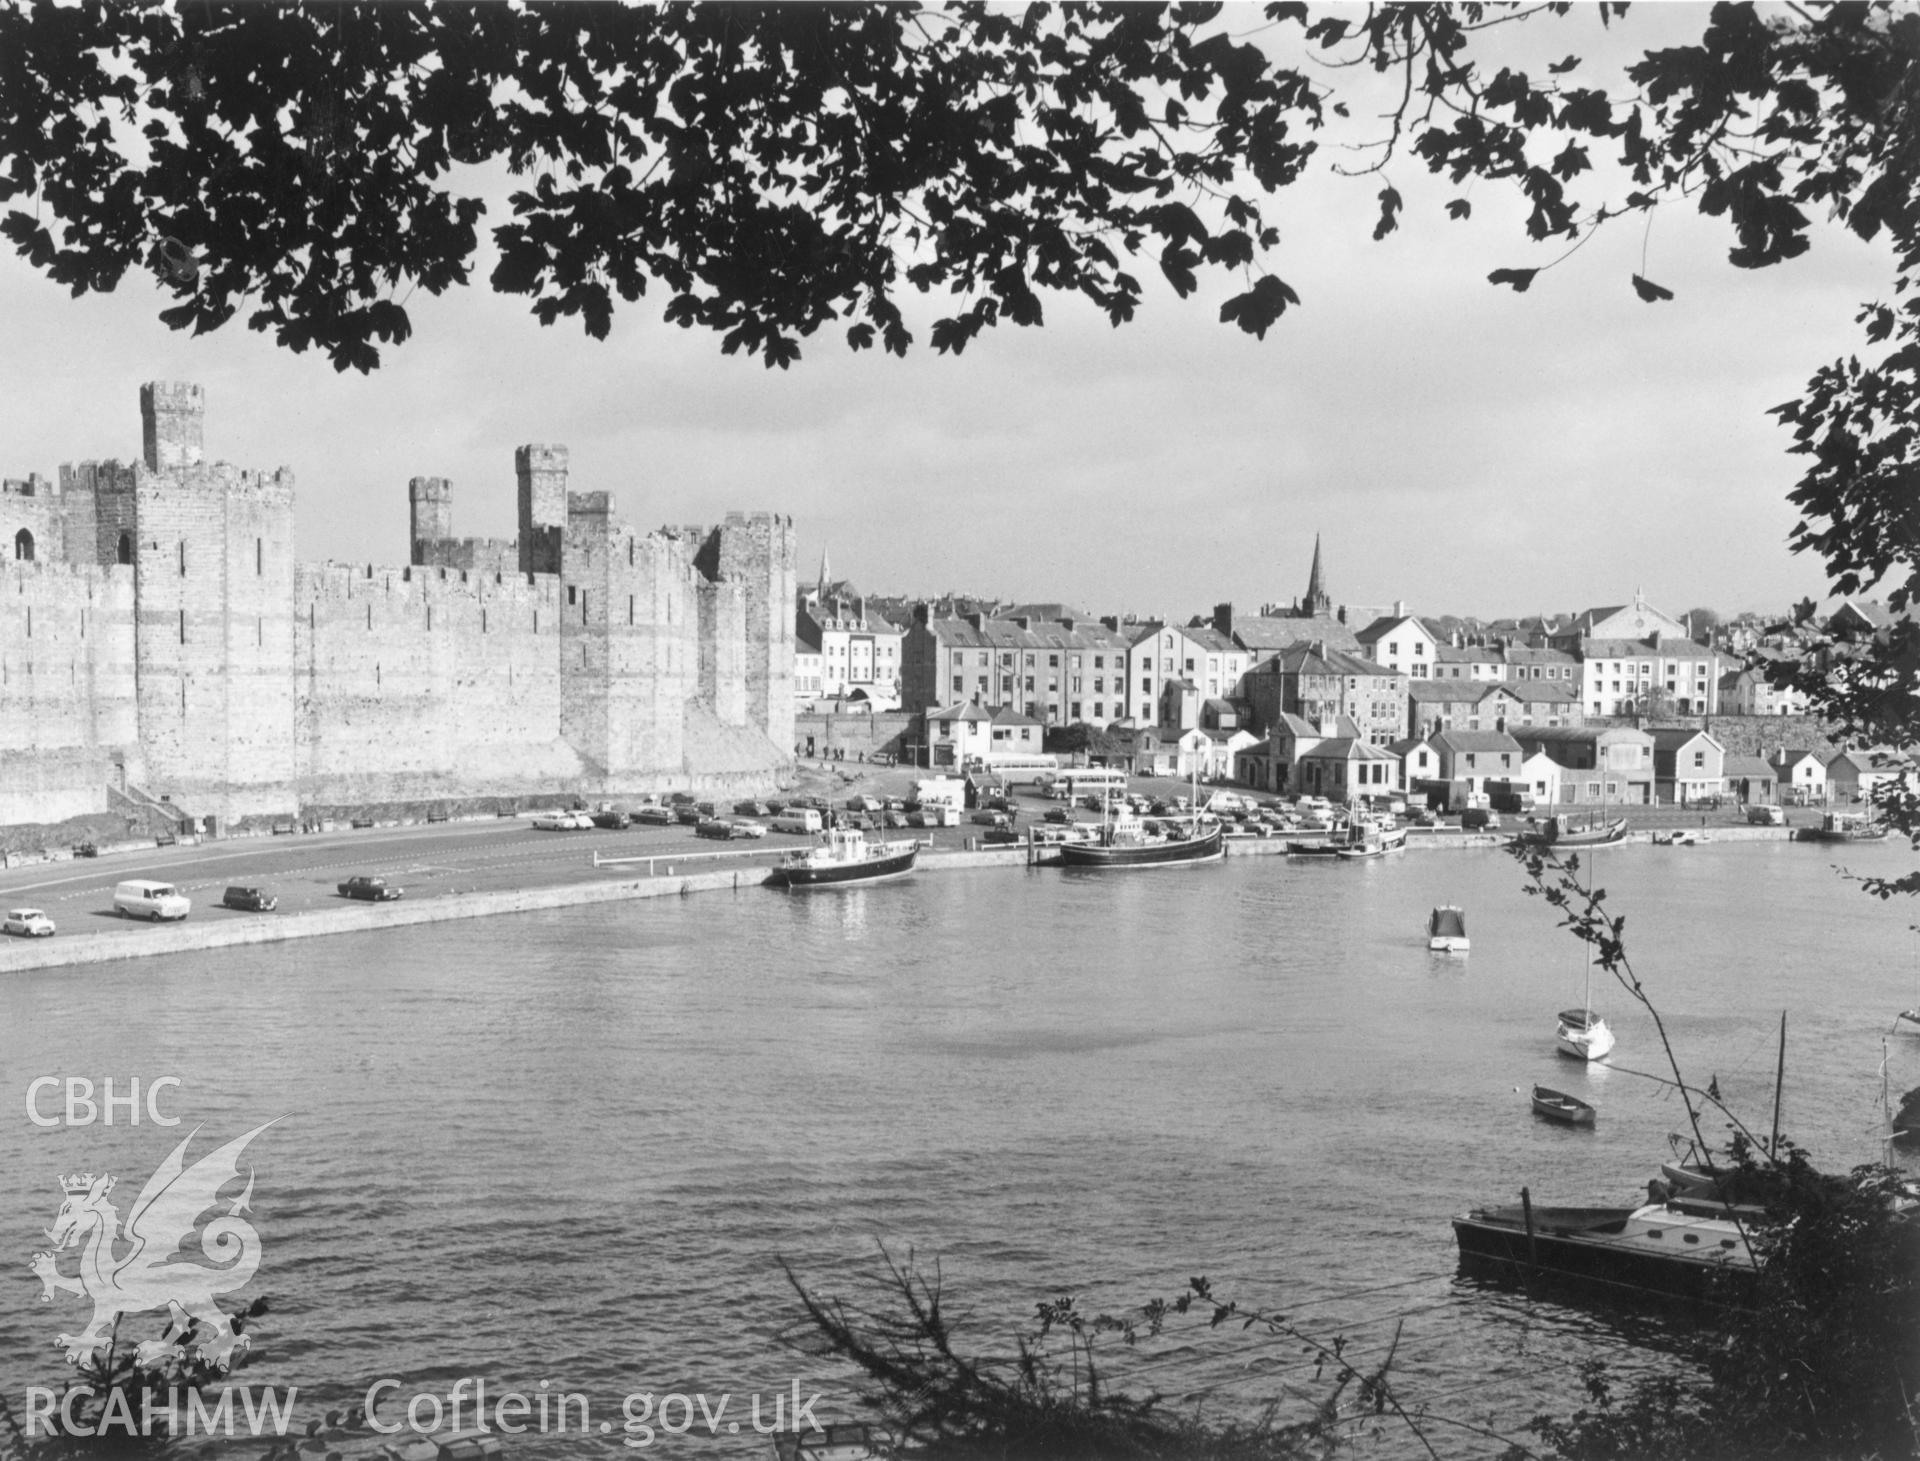 1 b/w print showing view of Caernarfon from the river; collated by the former Central Office of Information.